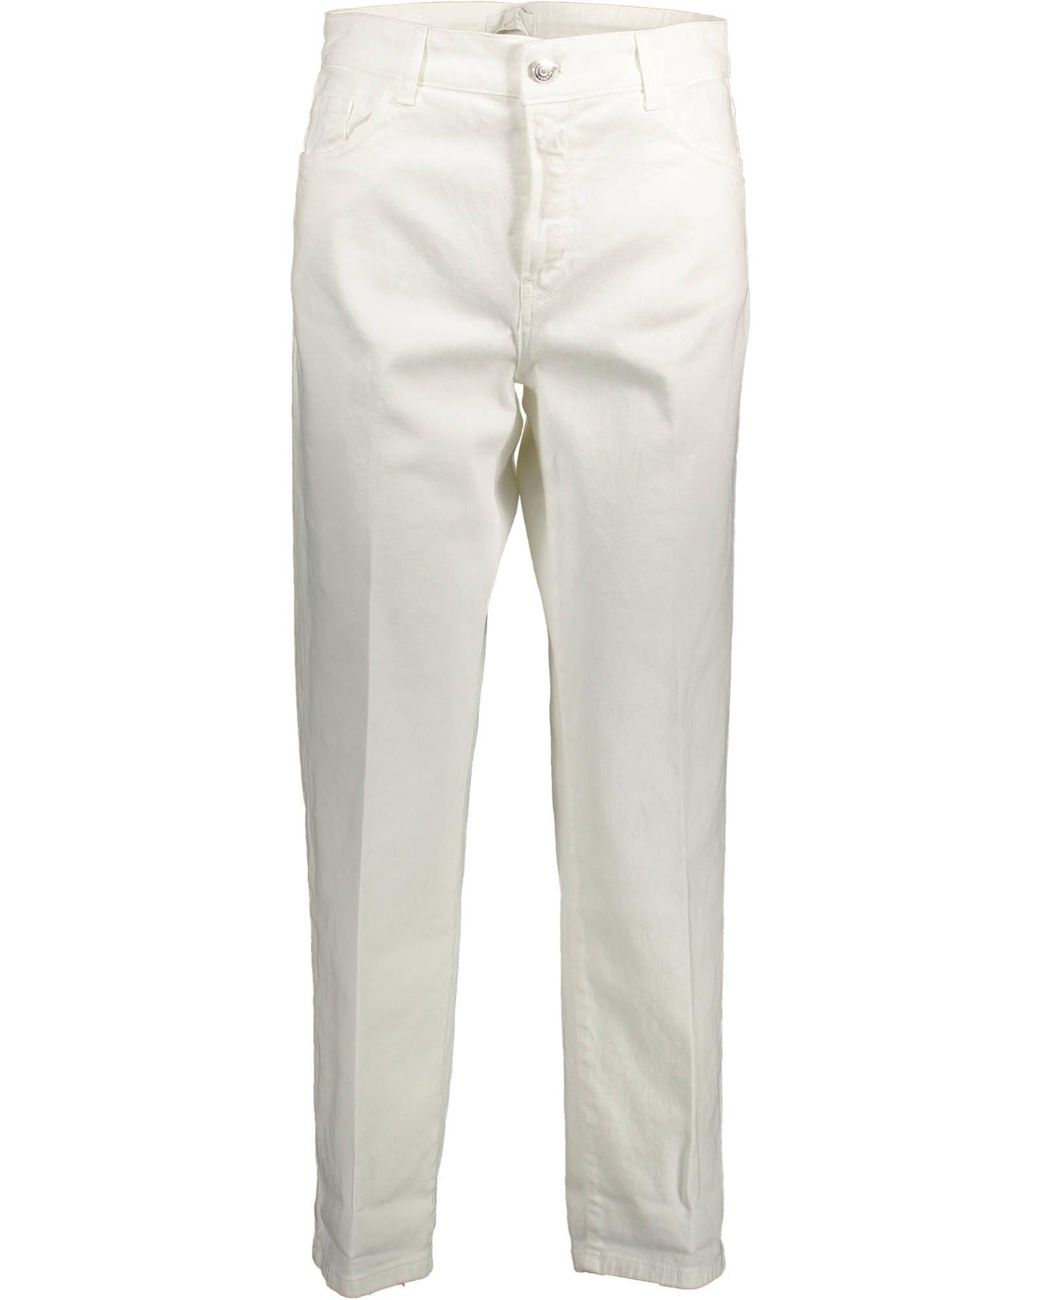 Kocca Cotton Jeans & Pant in White | Lyst